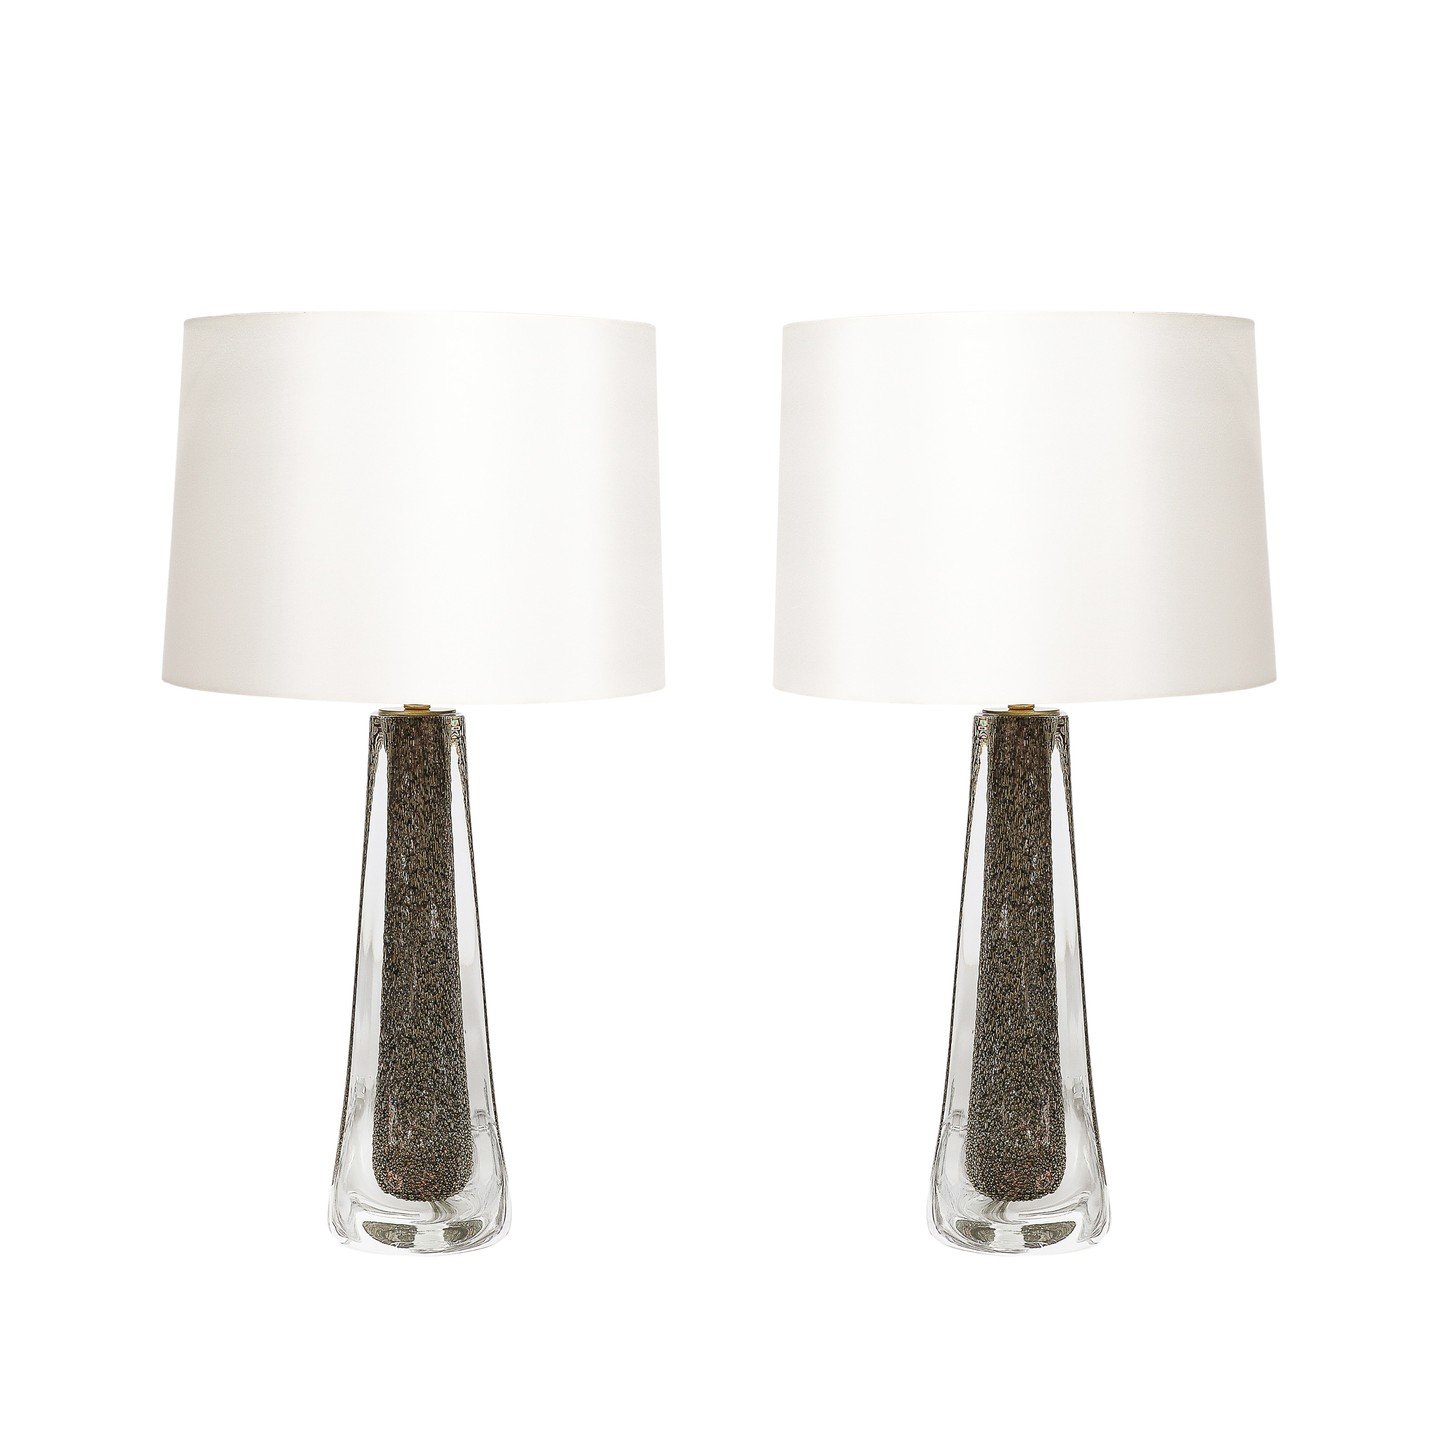 Modernist Hand-Blown Murano Bullicante Detailed Glass &amp; Brass Fitted Table Lamps

These bold and materially stunning Modernist Hand-Blown Murano Glass Table Lamps W/ Bullicante Detailing in Smoked Bronze &amp; Brass Fittings originate from Italy 